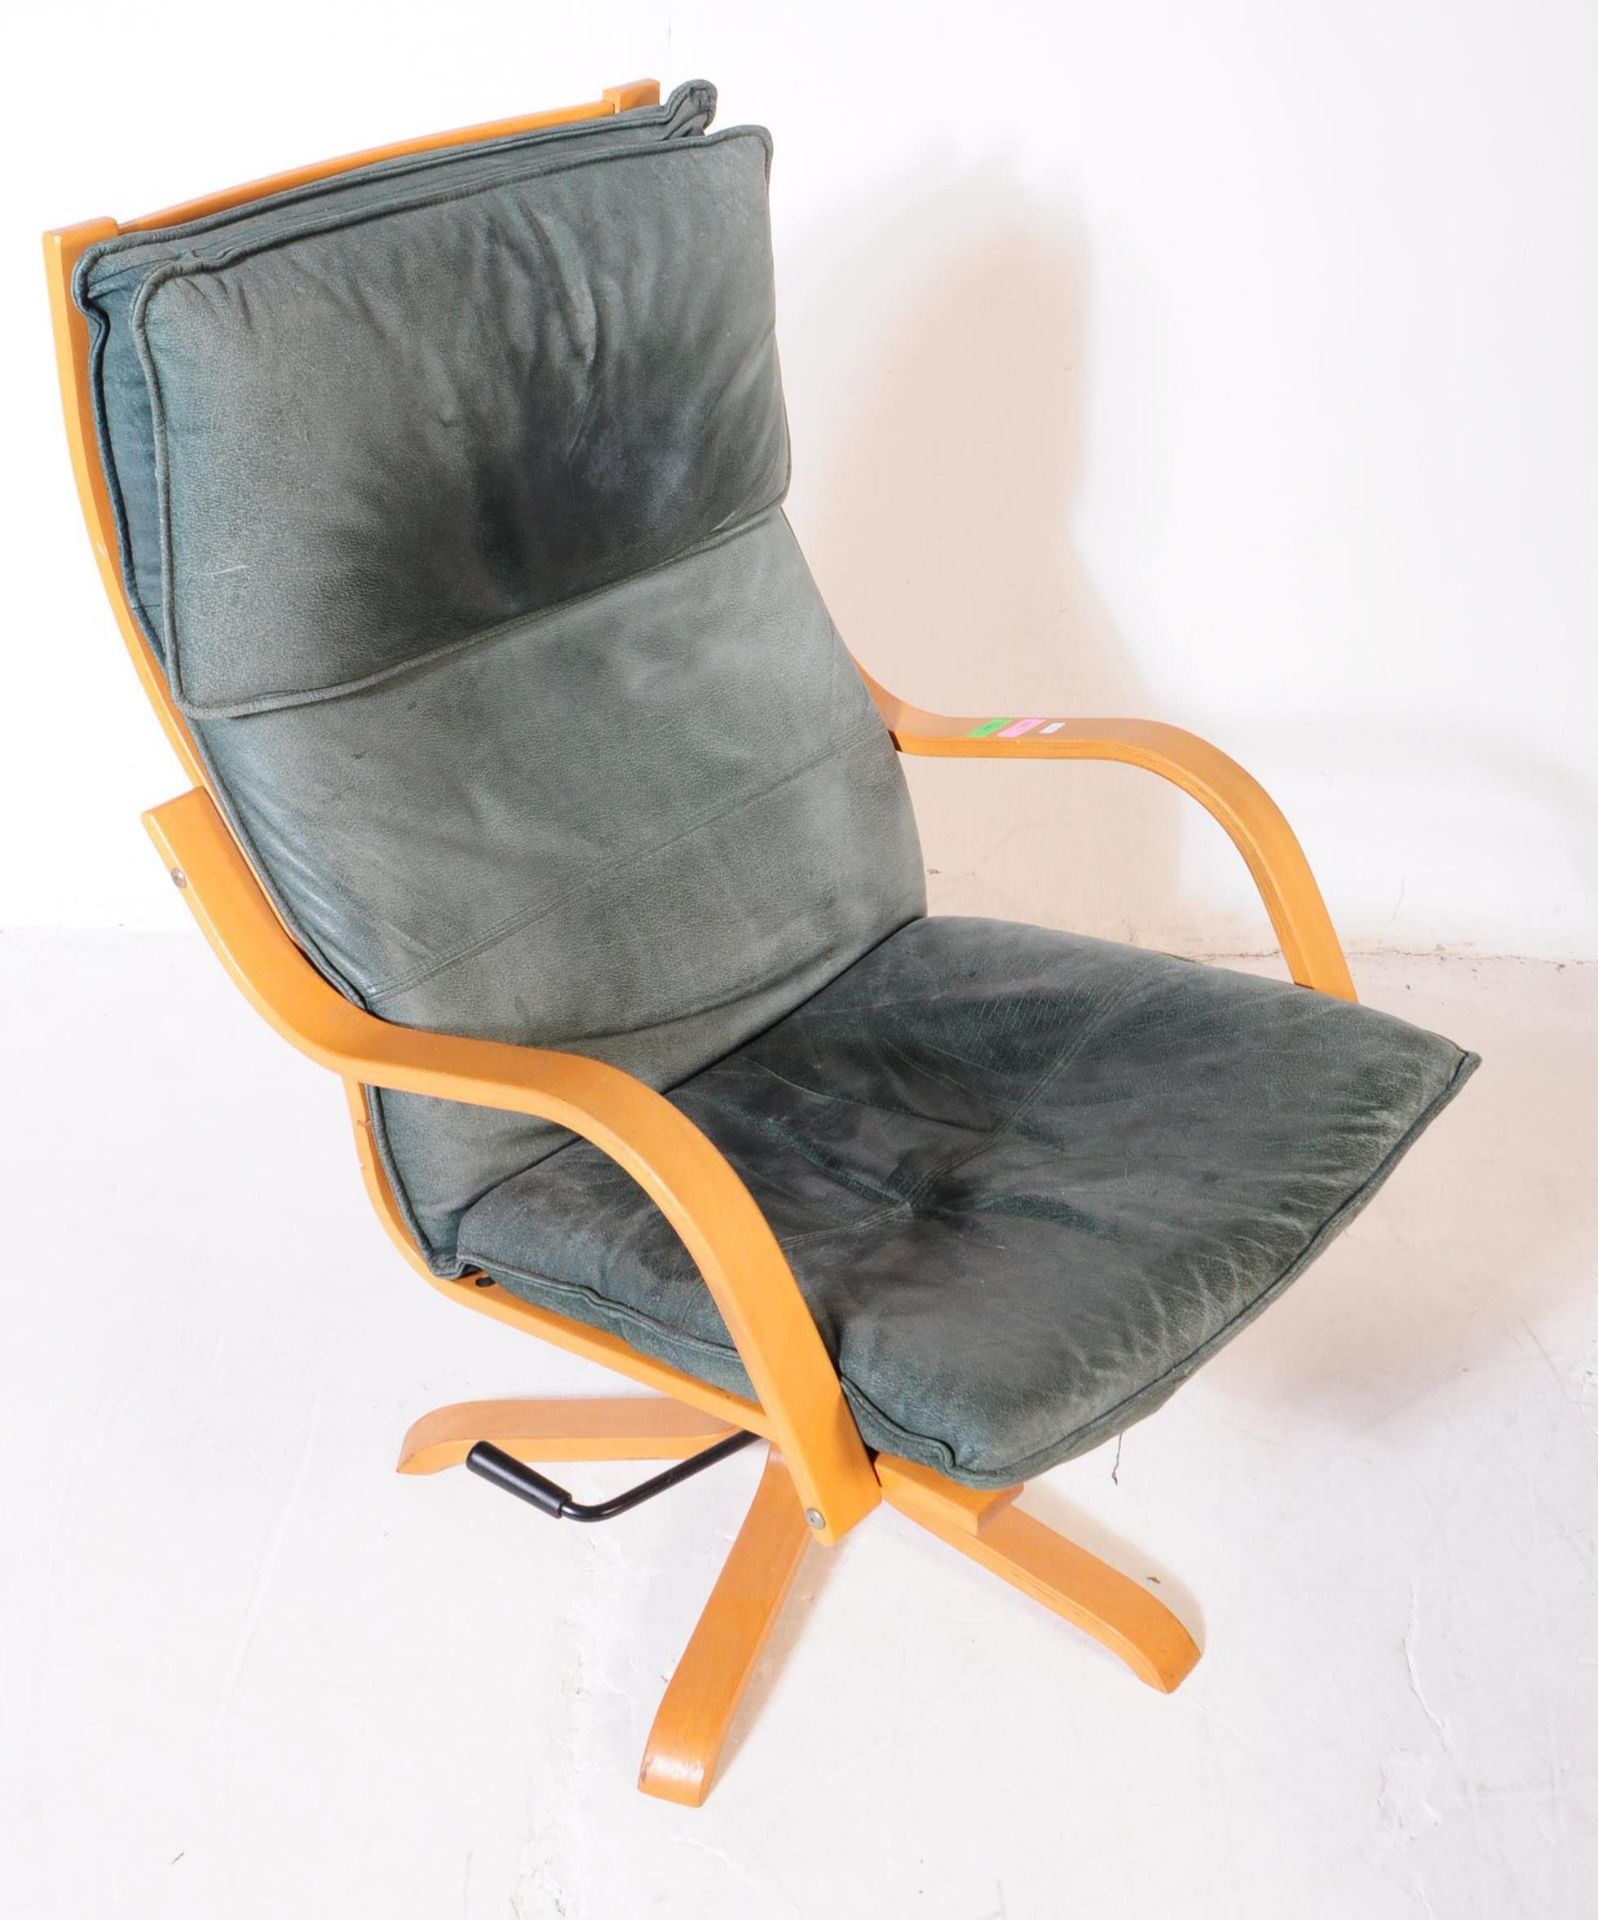 20TH CENTURY IKEA BENTWOOD LEATHER SWIVEL CHAIR & STOOL - Image 2 of 4